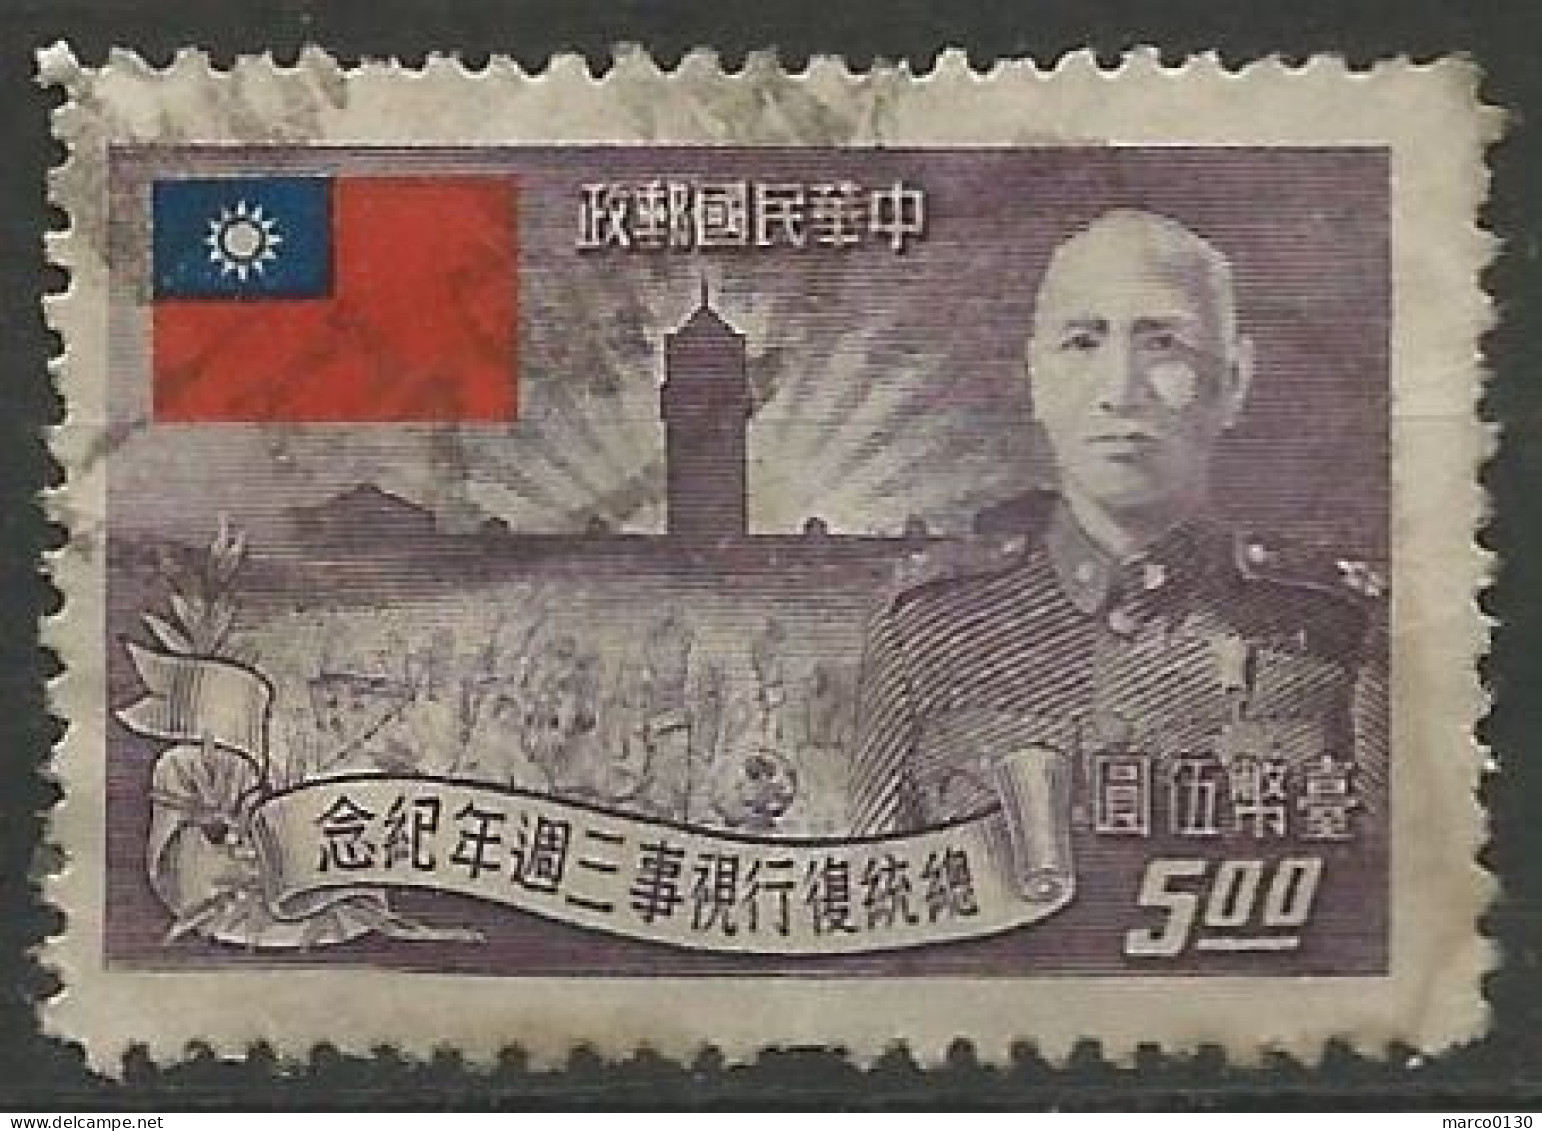 FORMOSE (TAIWAN) N° 151 OBLITERE - Used Stamps